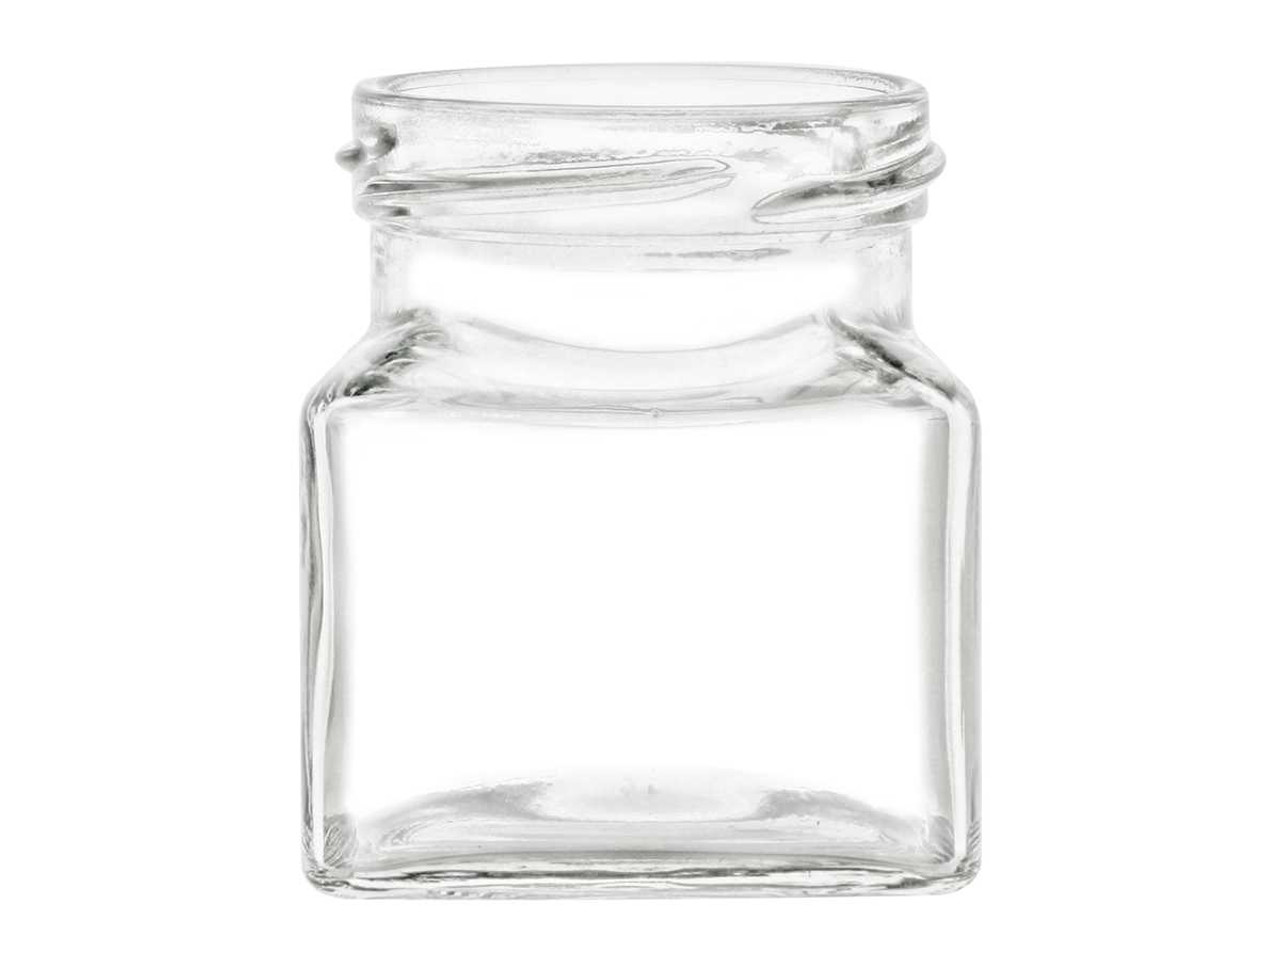 https://cdn11.bigcommerce.com/s-1ybtx/images/stencil/1280x1280/products/1269/6681/4-oz-Cube-Square-Glass-Jars-with-Lid-Made-in-Europe_4213__89545.1699989081.jpg?c=2?imbypass=on